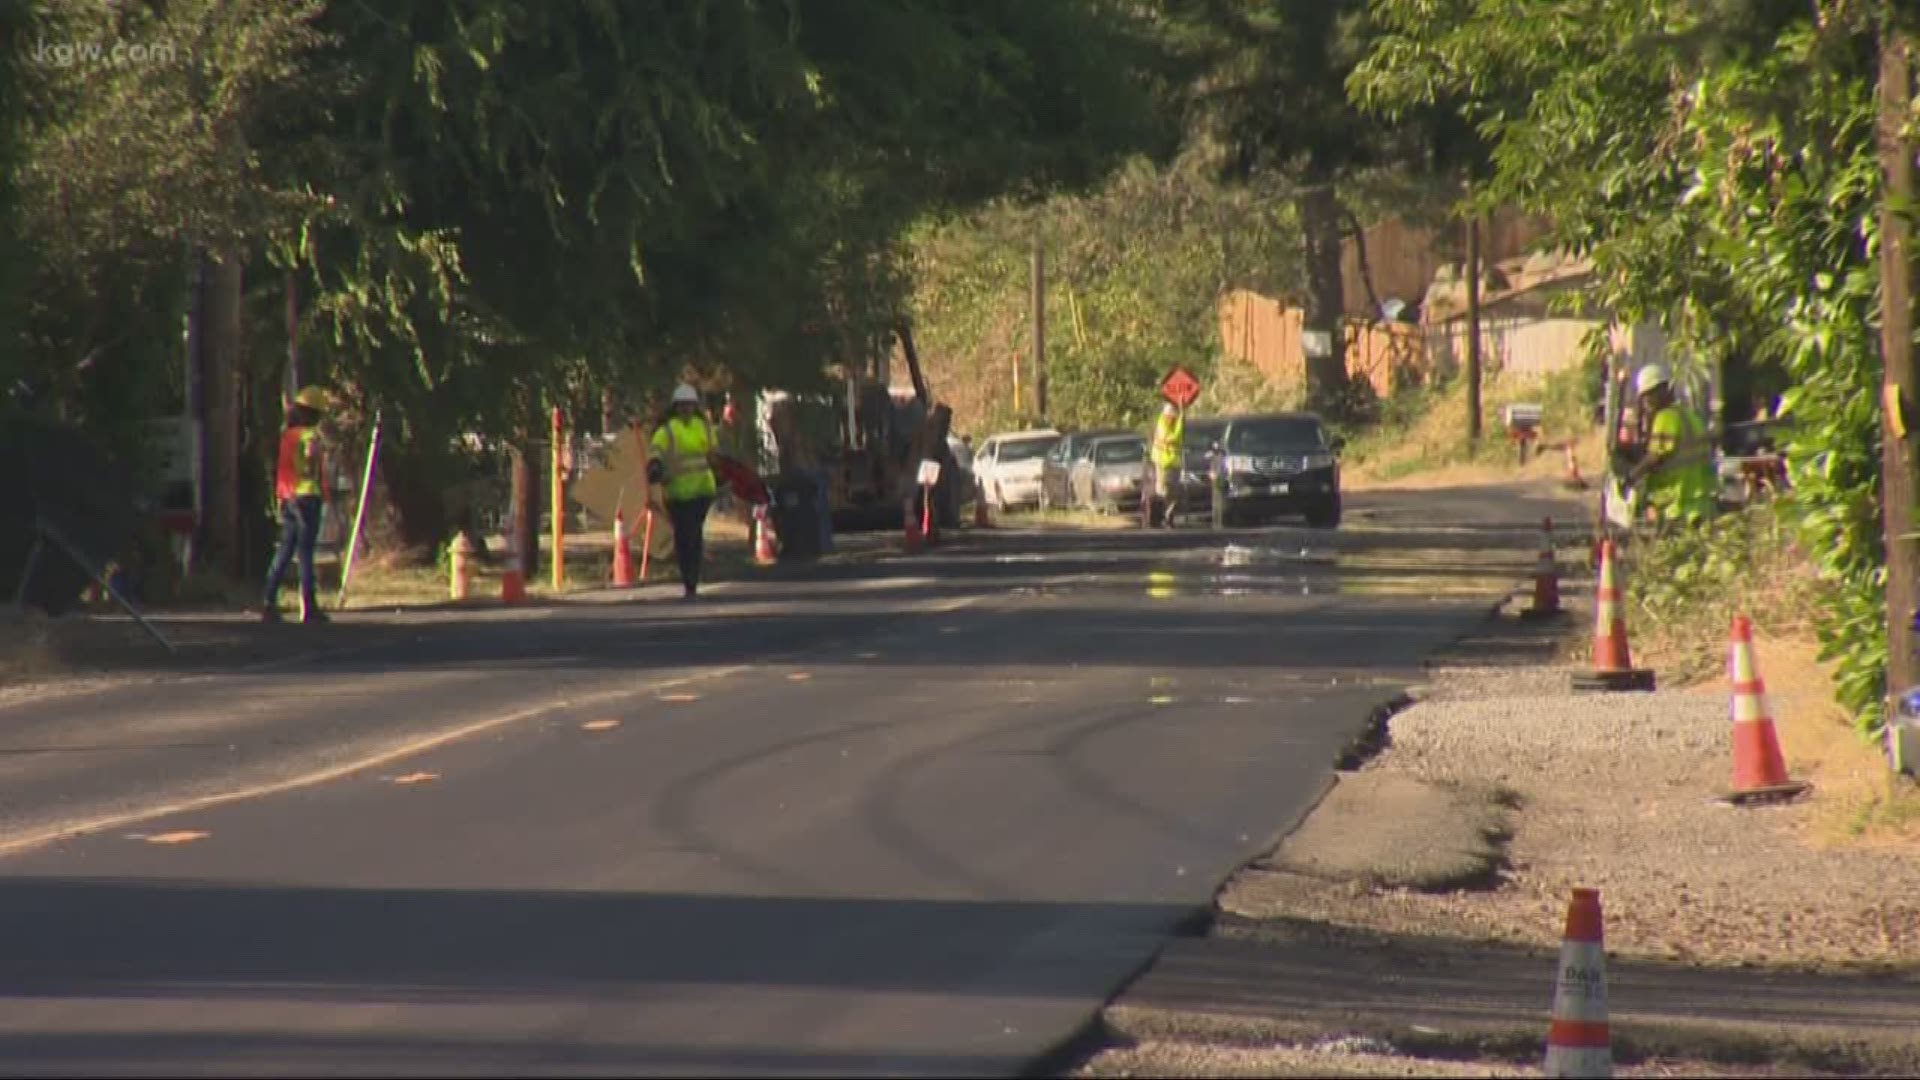 Police say a construction flagger was hit by a driver unhappy with the road stoppage in Camas.